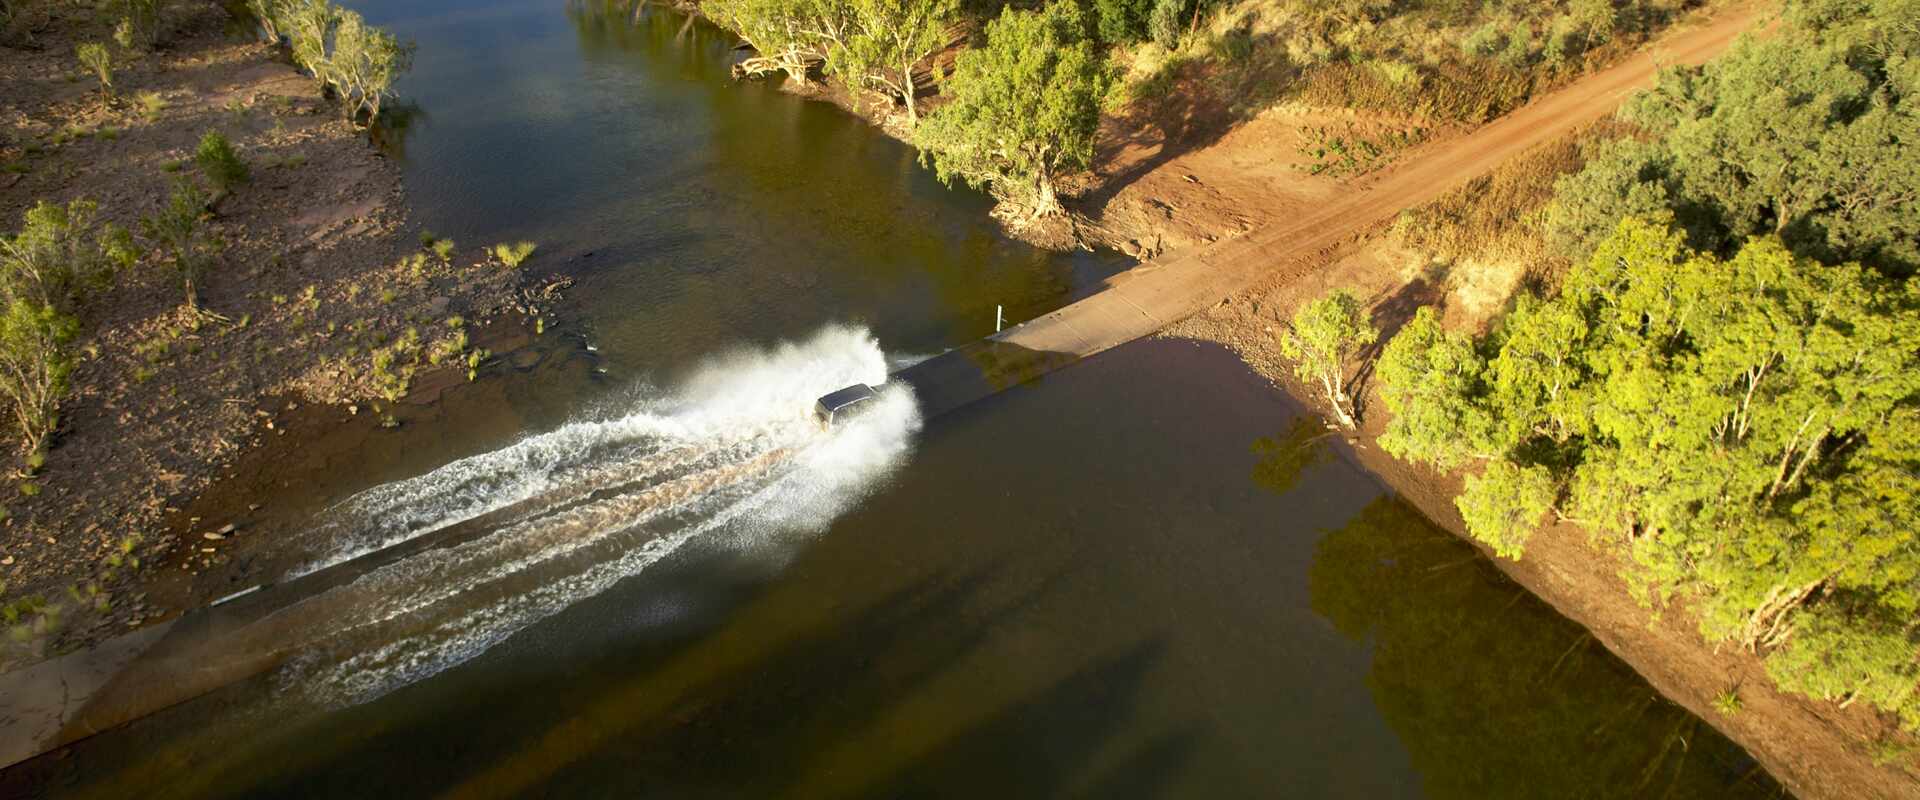 Aerial view of the Savannah Way, Northern Territory Tourism NT Peter Eve